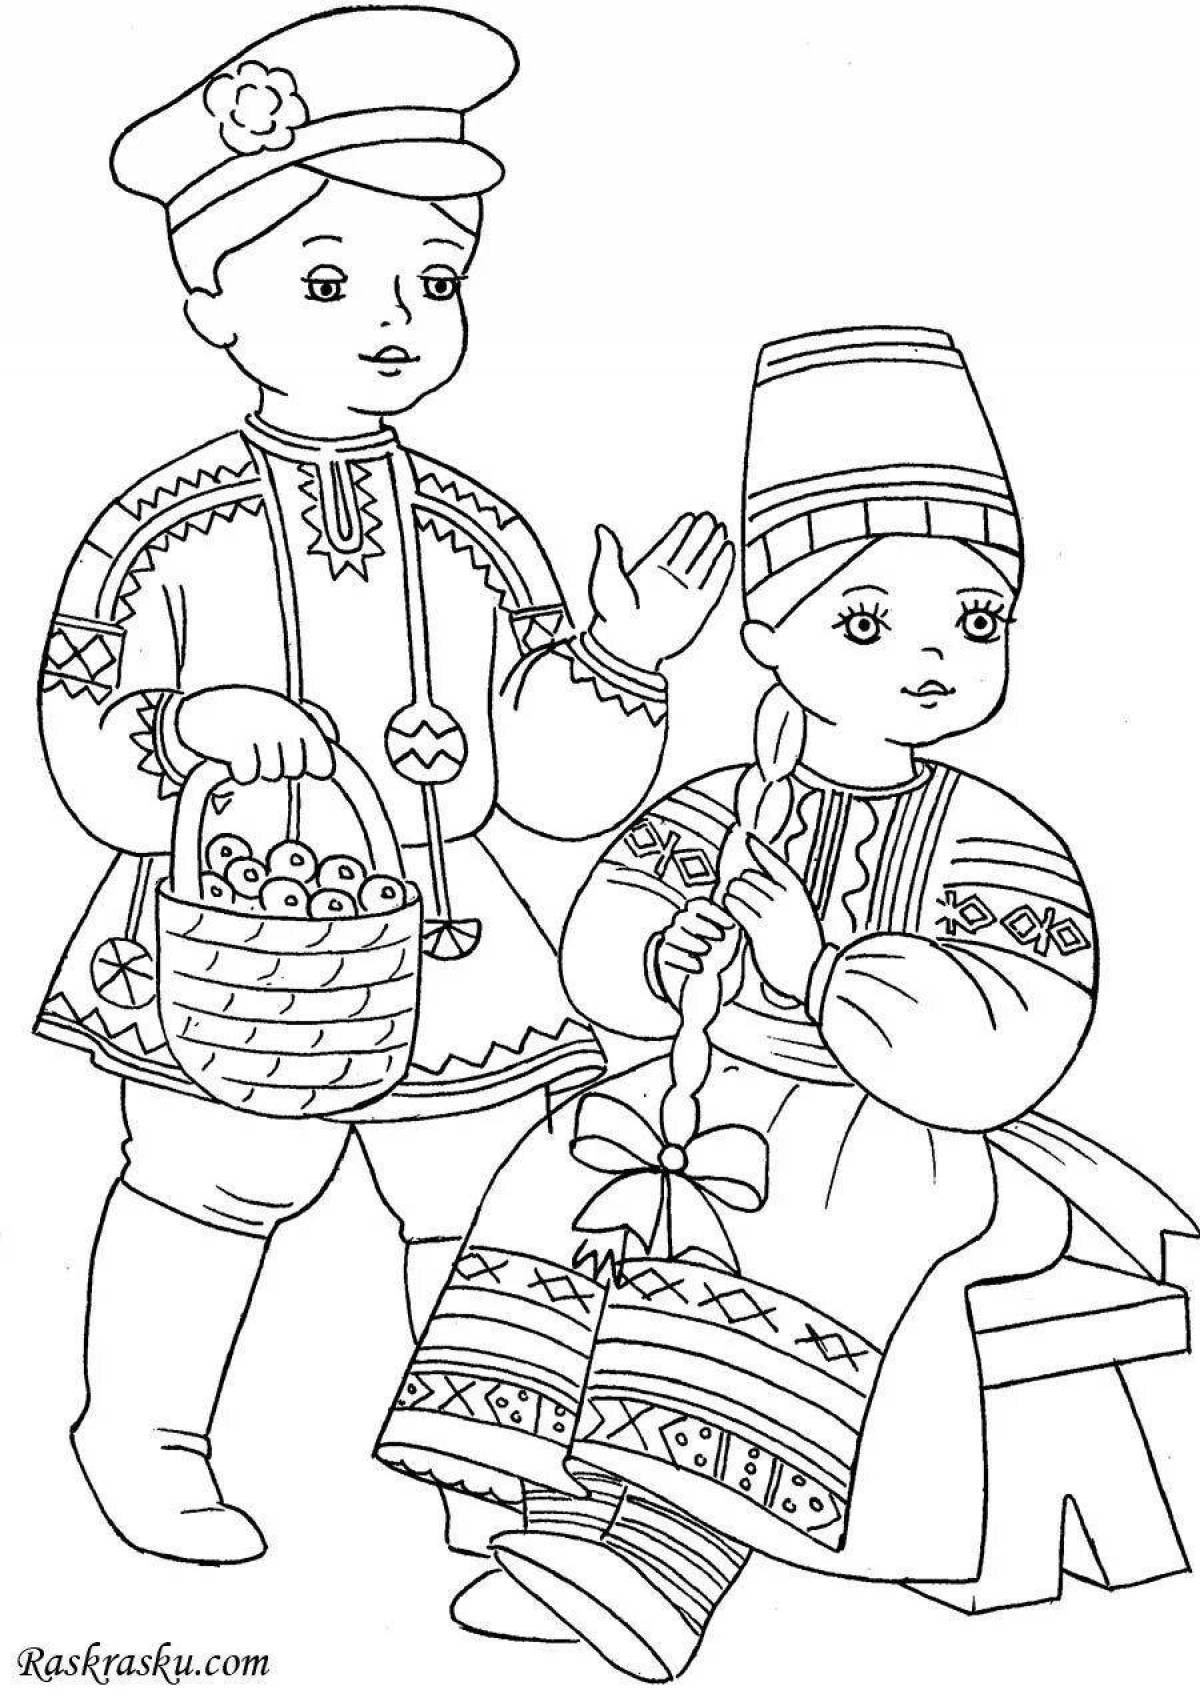 Fairytale folk costumes coloring book for children